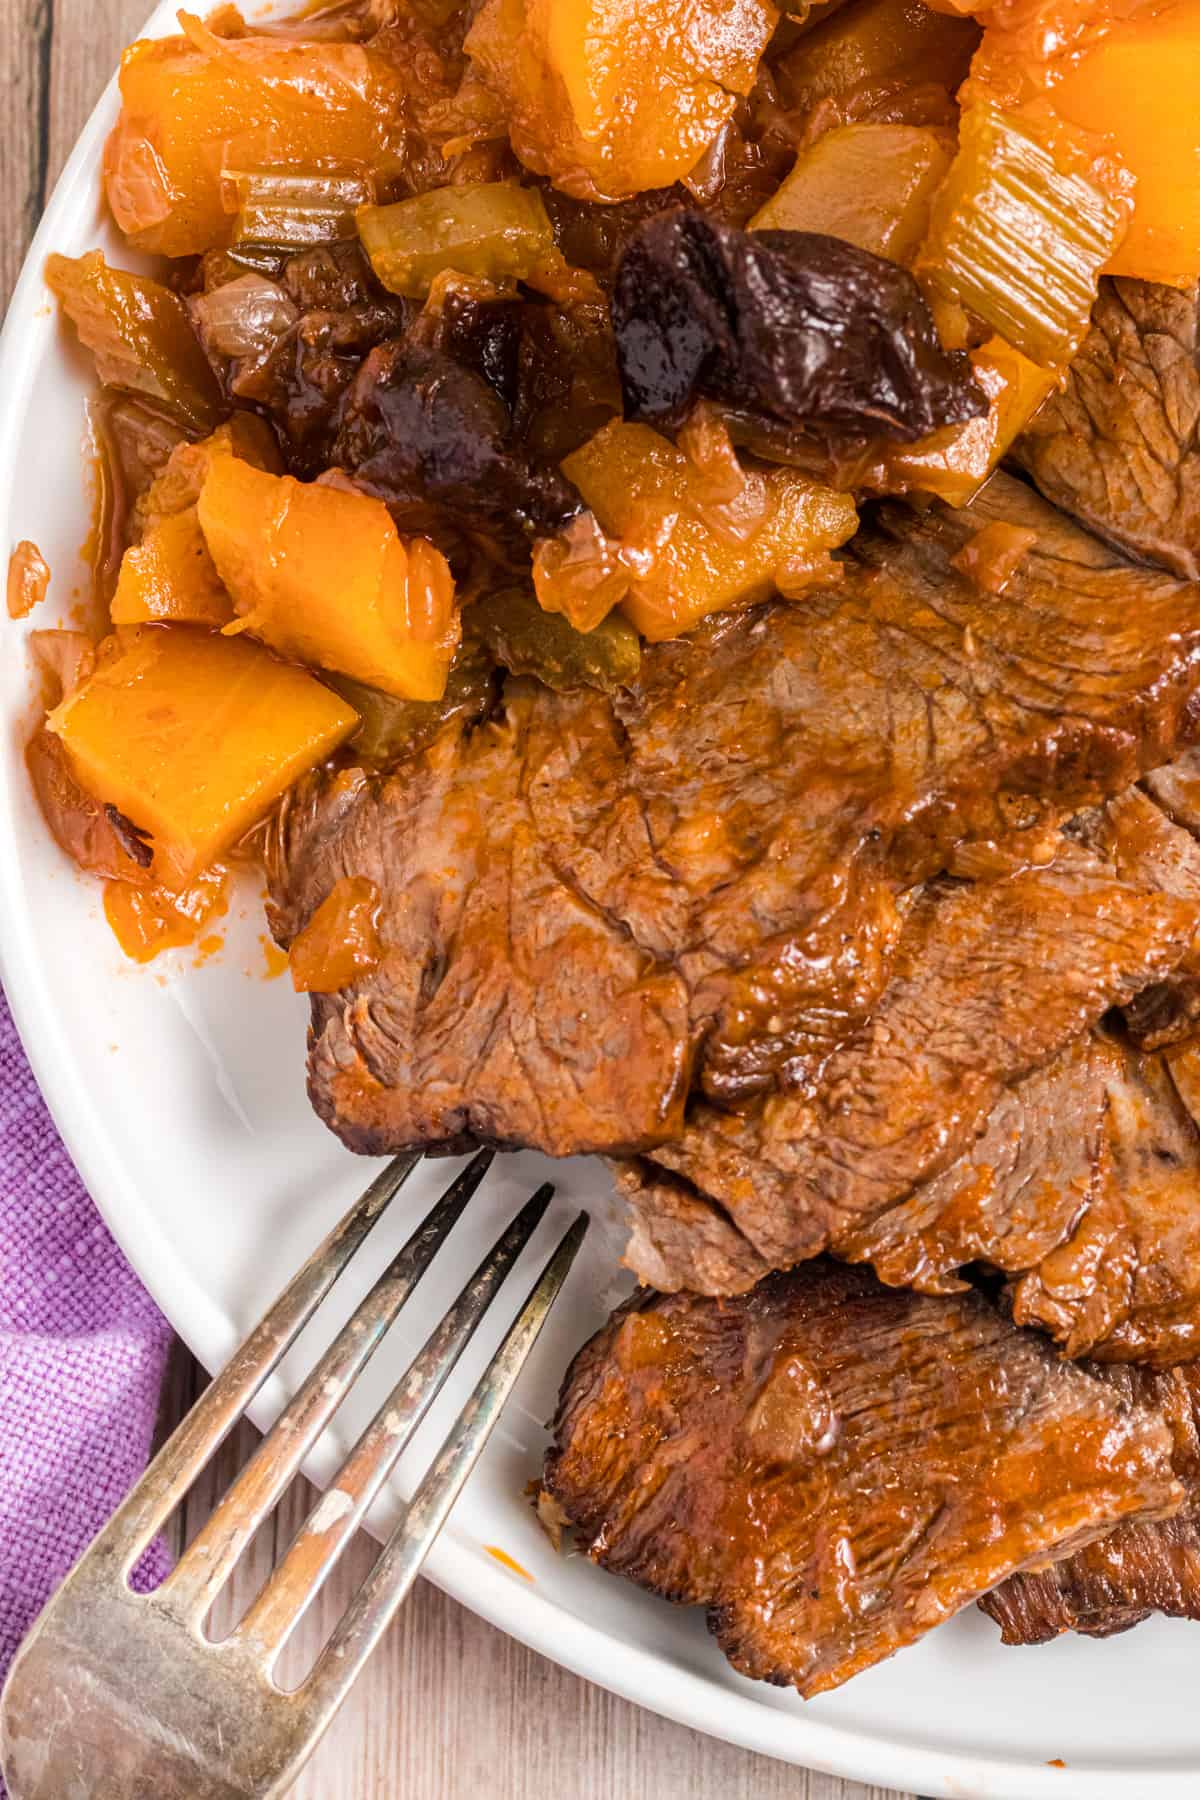 Pot roast, butternut squash and plums are plated on a round white plate with a metal fork.